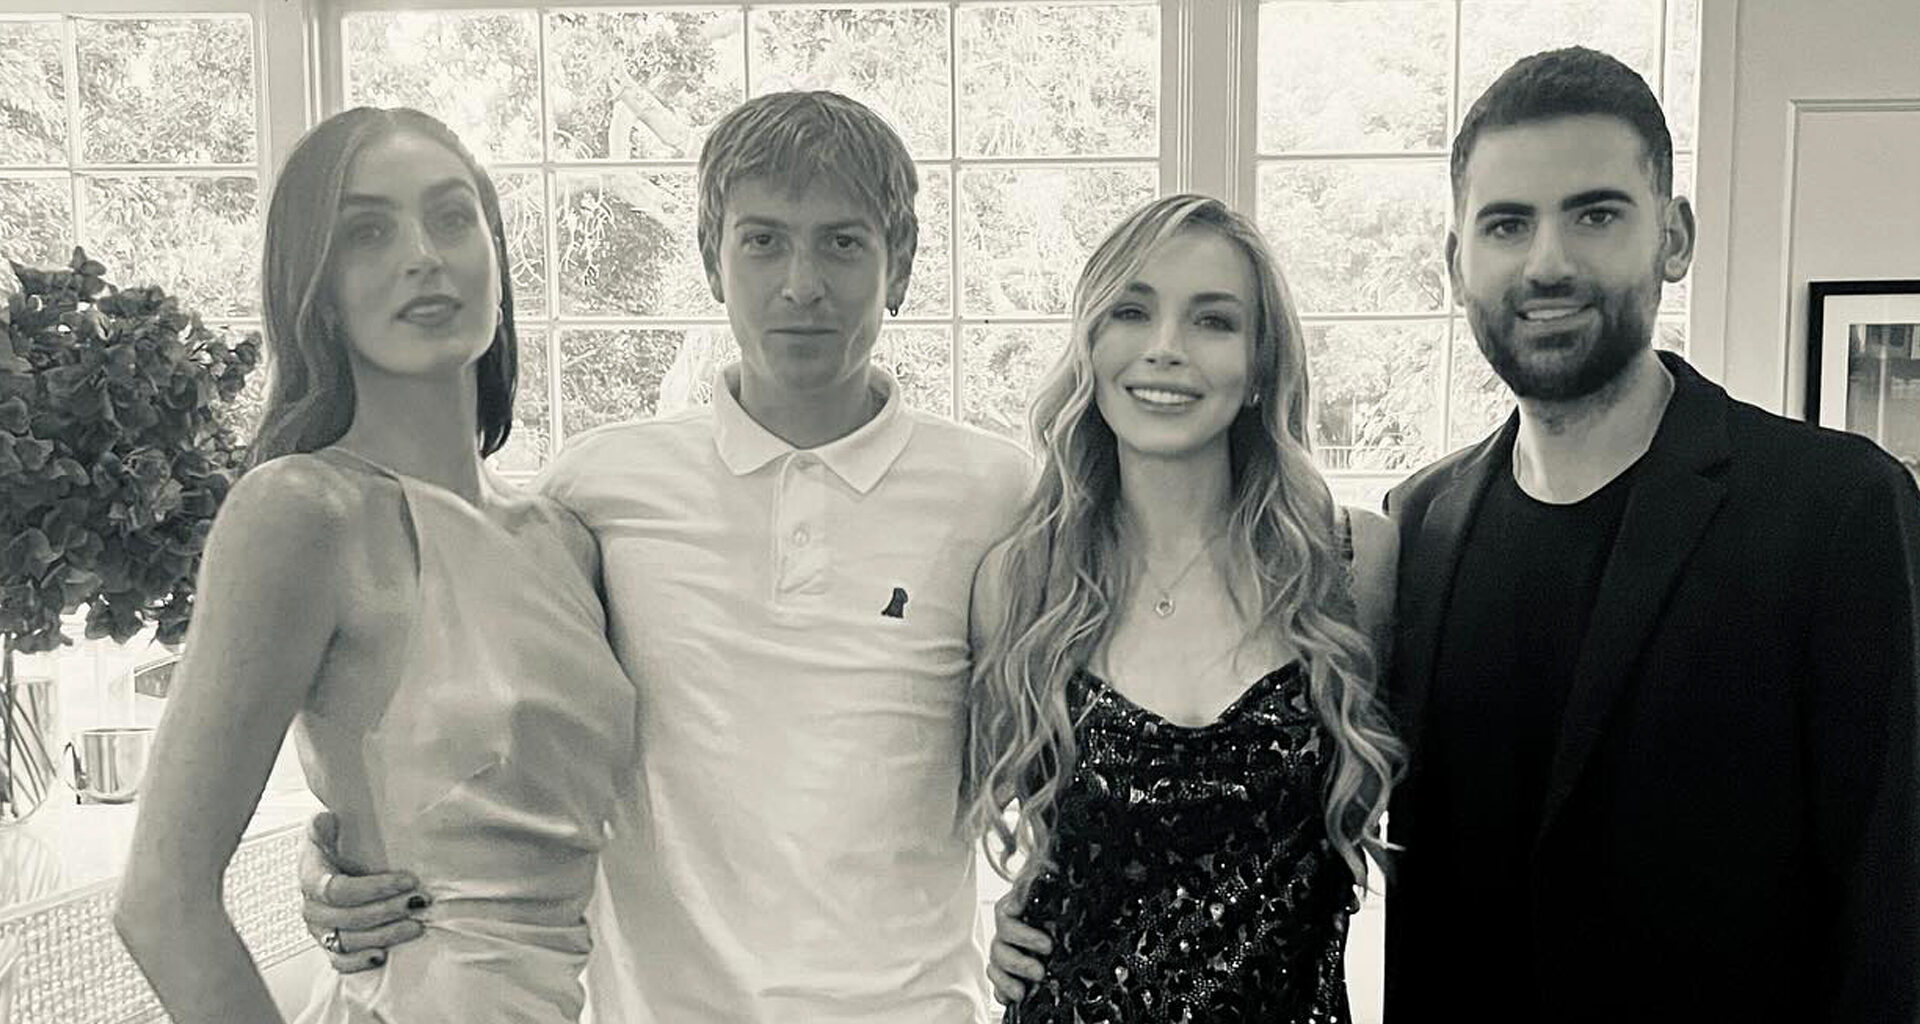 Lindsay Lohan parties with lookalike sister Aliana & brother Cody at 38th birthday bash as fans say she ‘looks amazing’